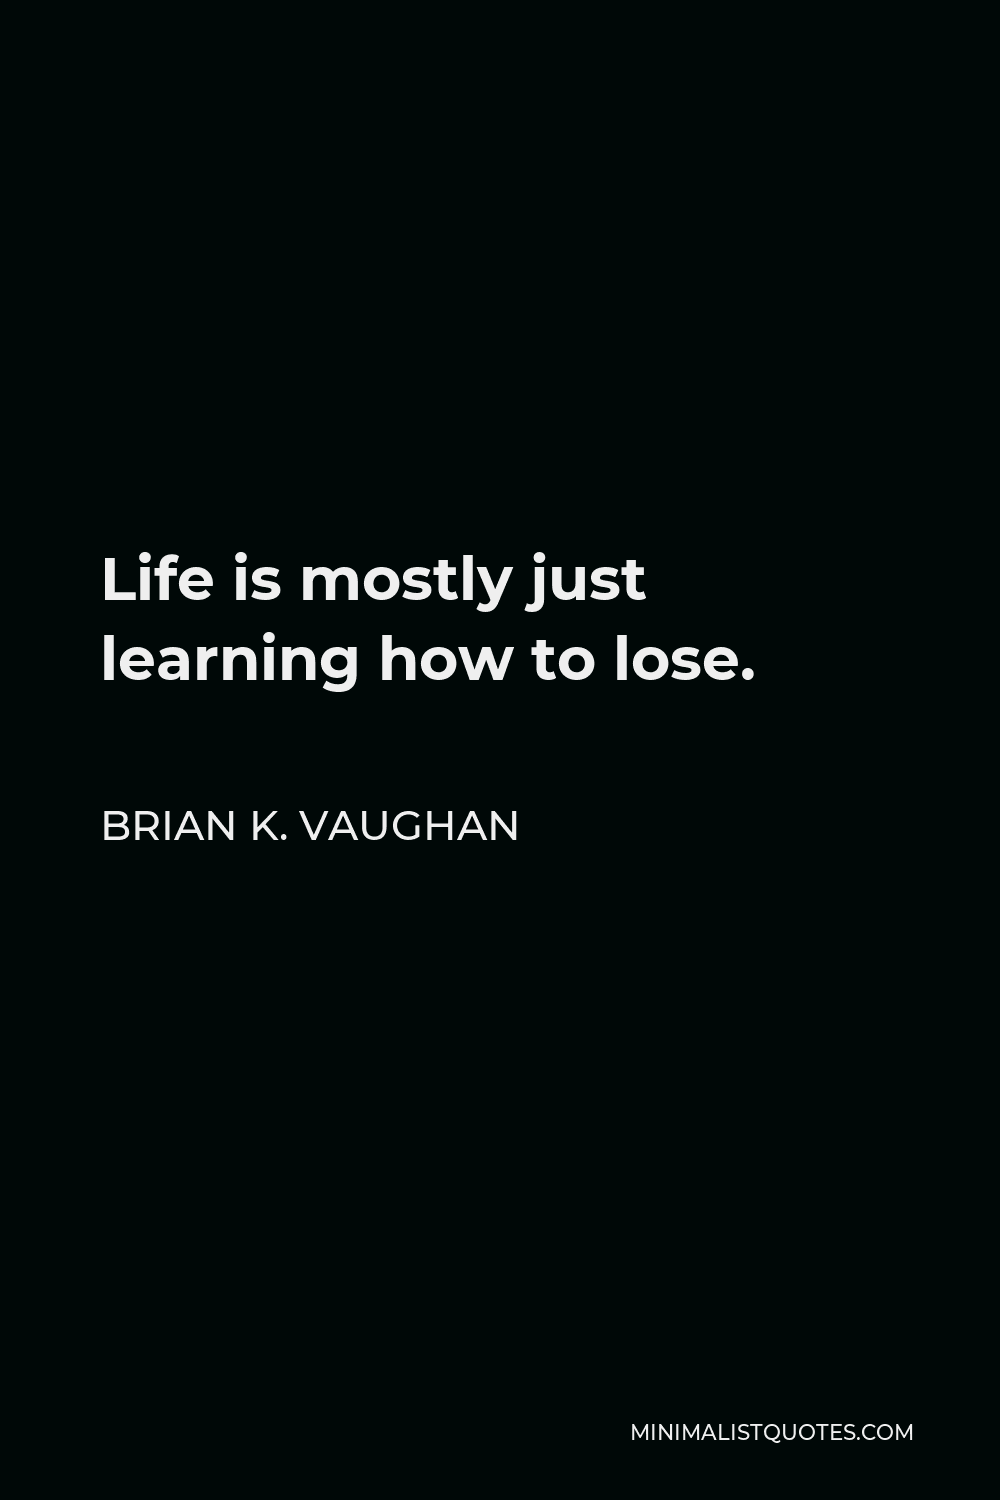 Brian K. Vaughan Quote - Life is mostly just learning how to lose.